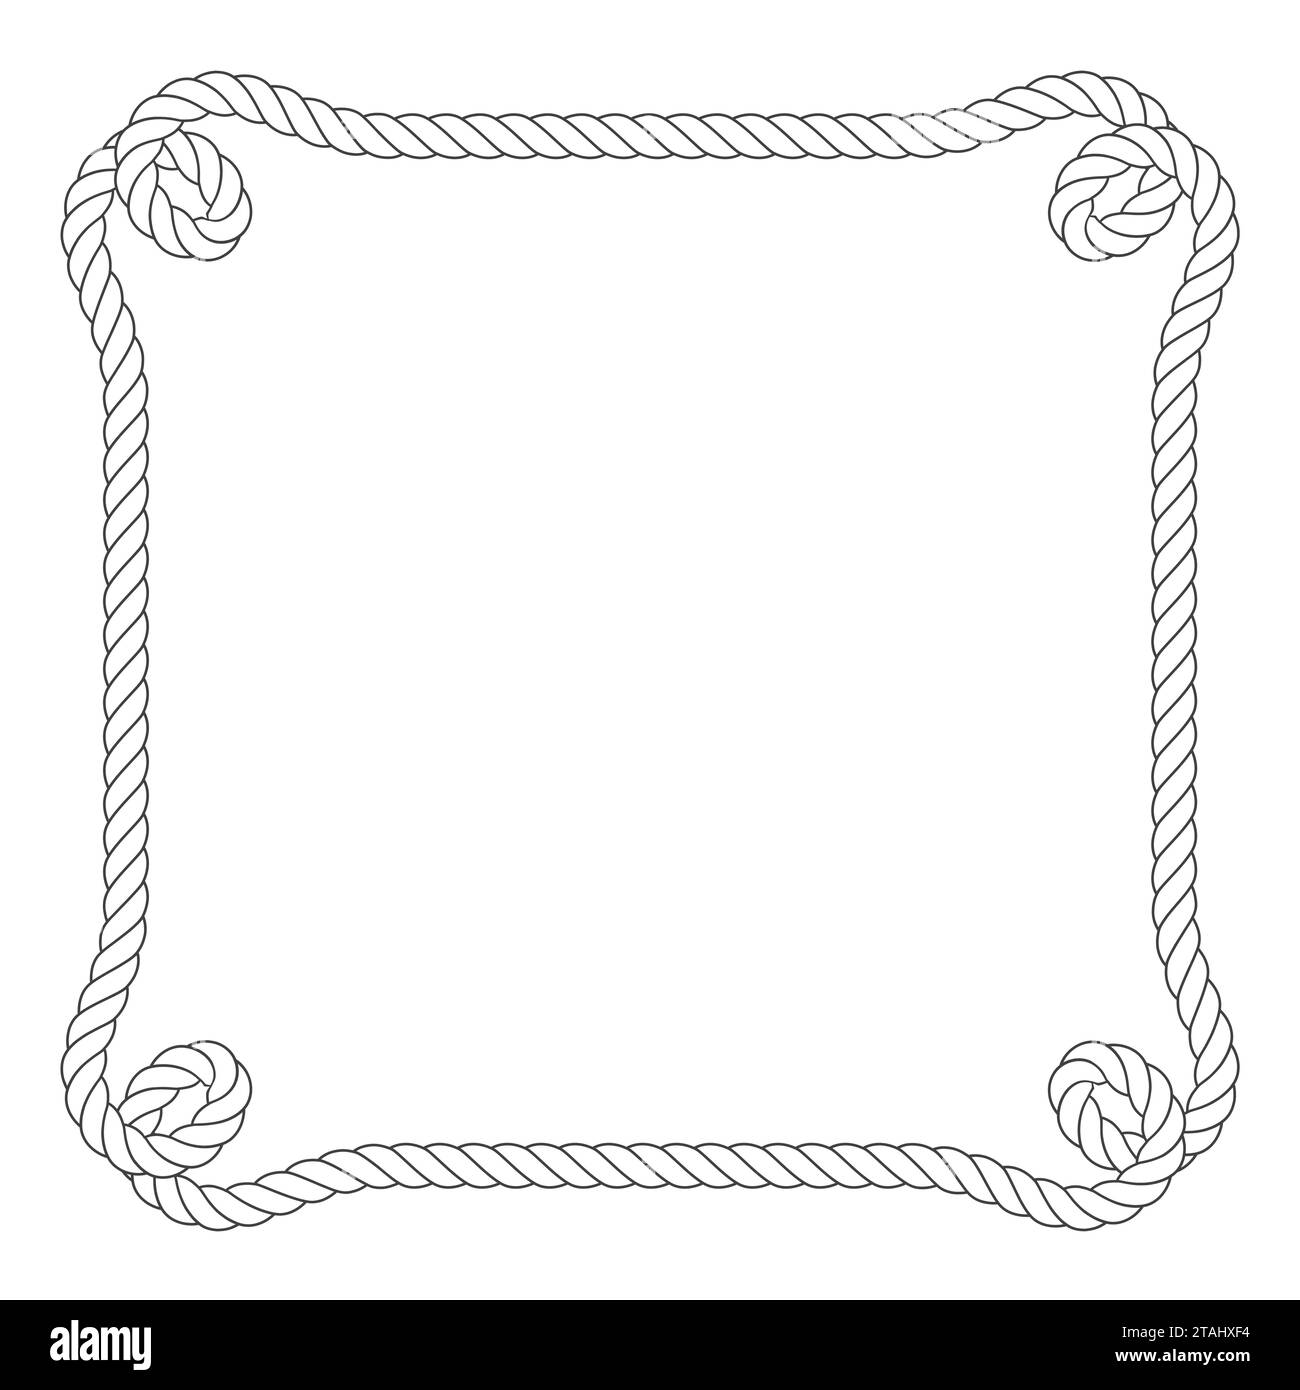 Square rope frame with loops in corners, twine simple border, vector Stock Vector